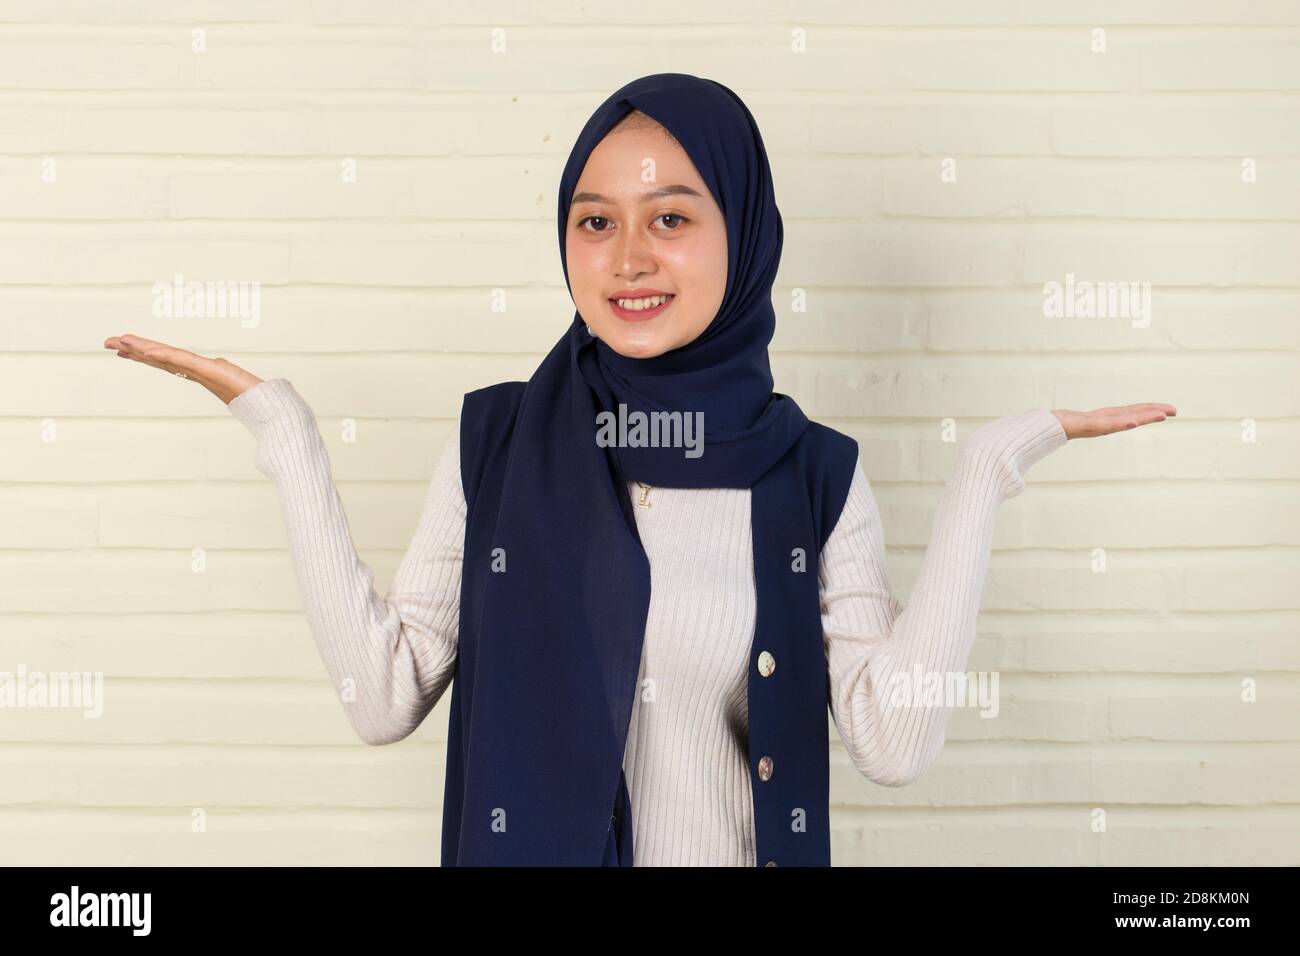 Young asianwoman wearing hijab smiling confident pointing with fingers to different directions. Stock Photo